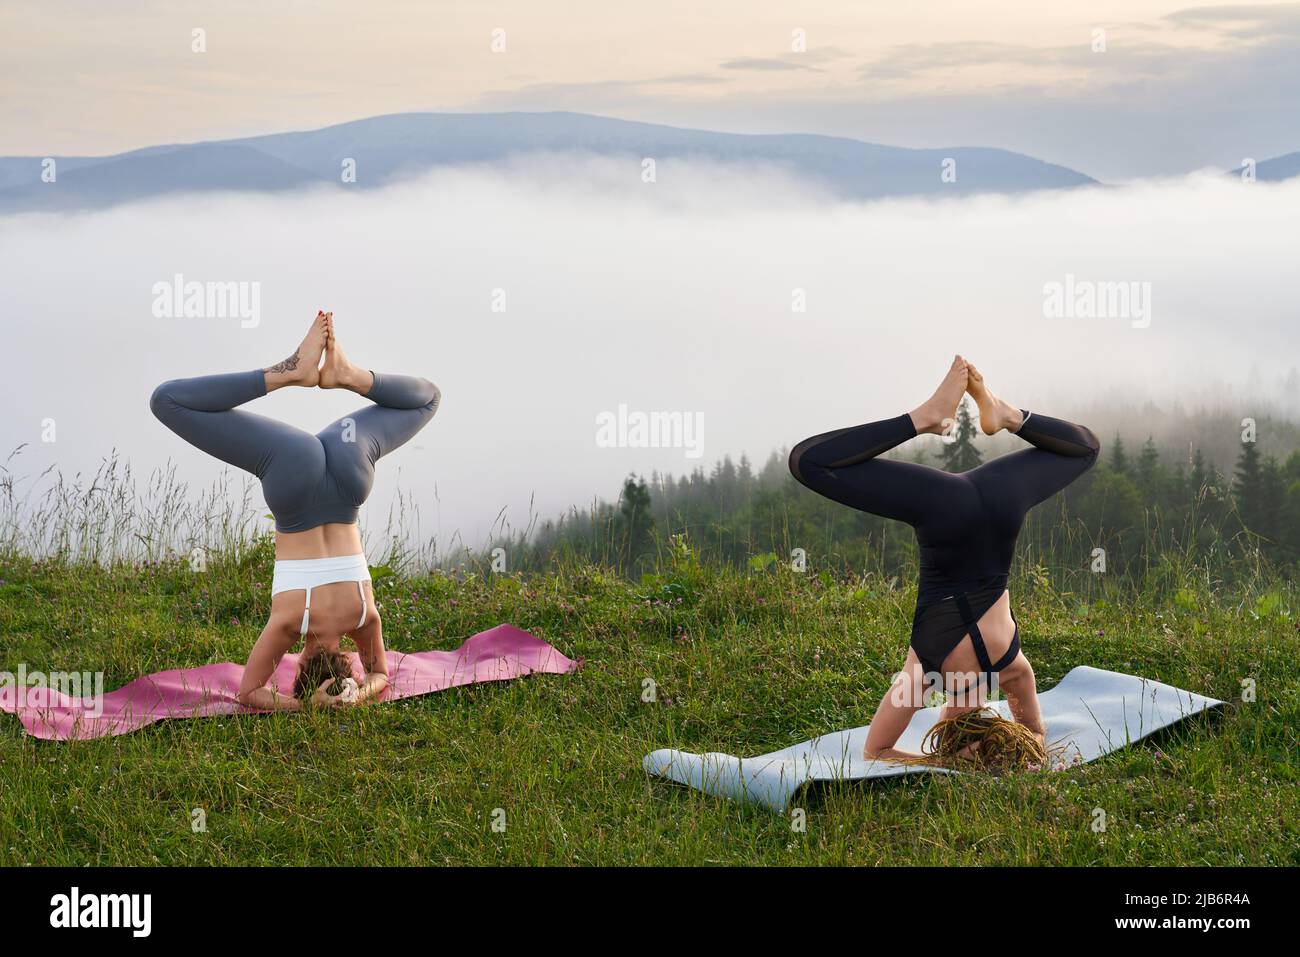 Two active women in sport clothes doing headstand exercises on yoga mat with amazing view of mountains on background. Concept of outdoors activity and balance. Stock Photo